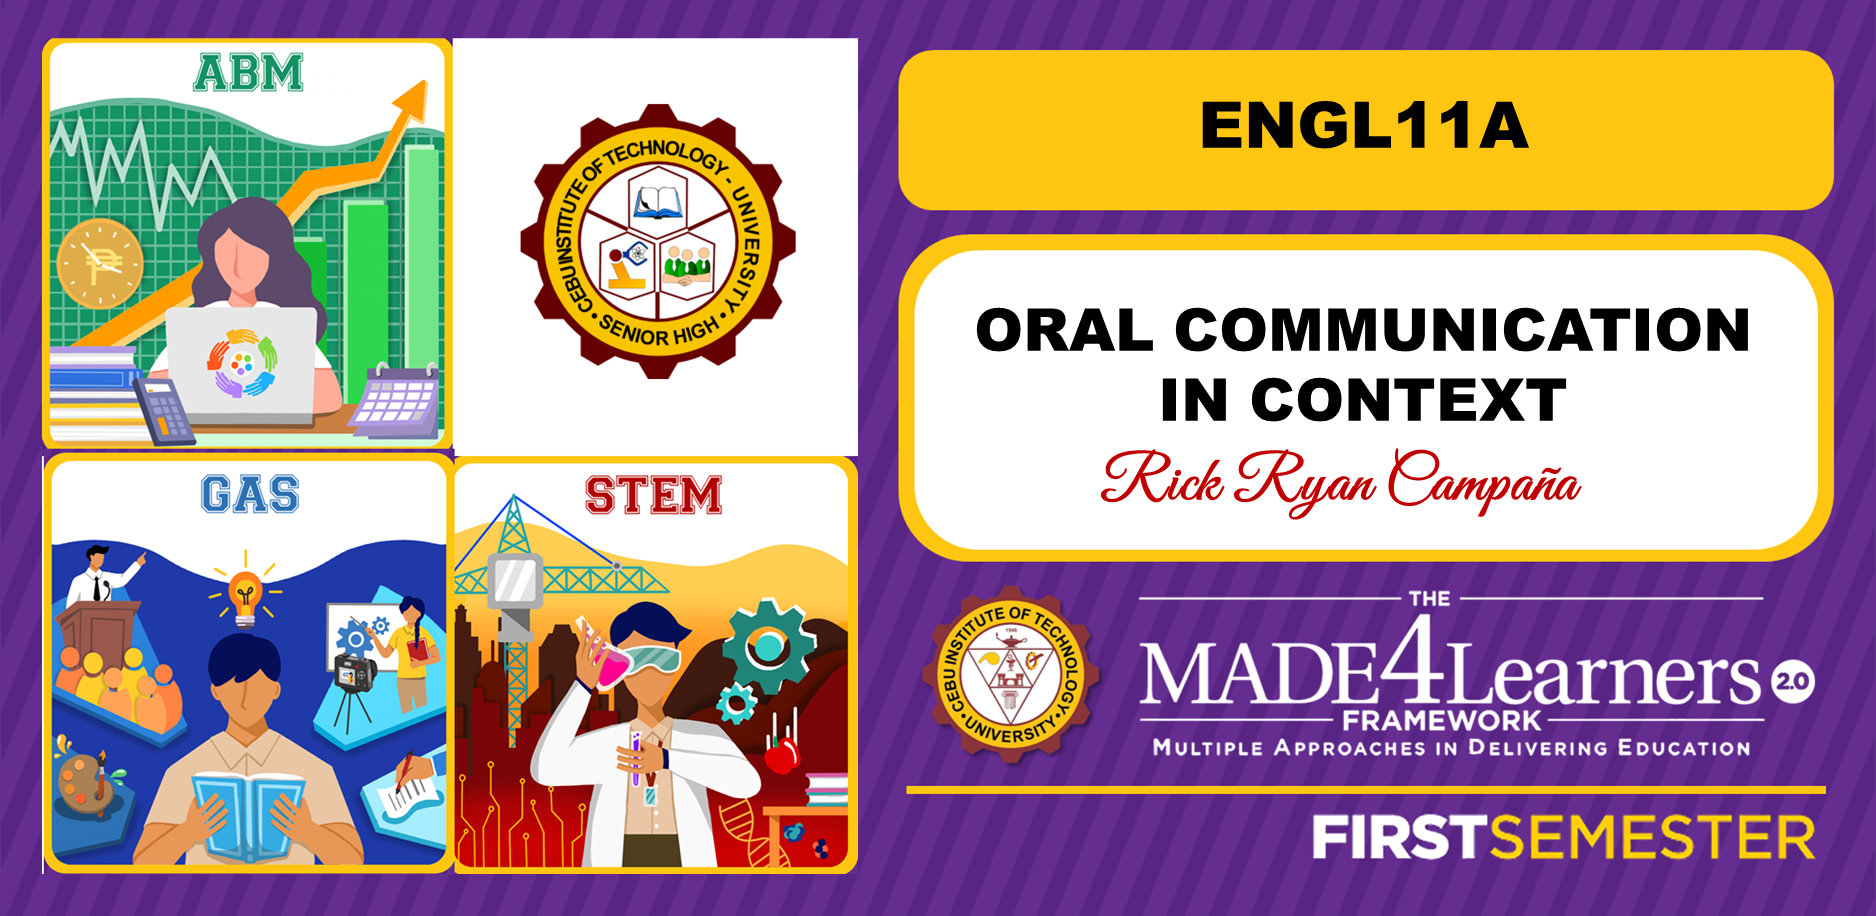 ENGL11A: Oral Communication in Context (Campaña)